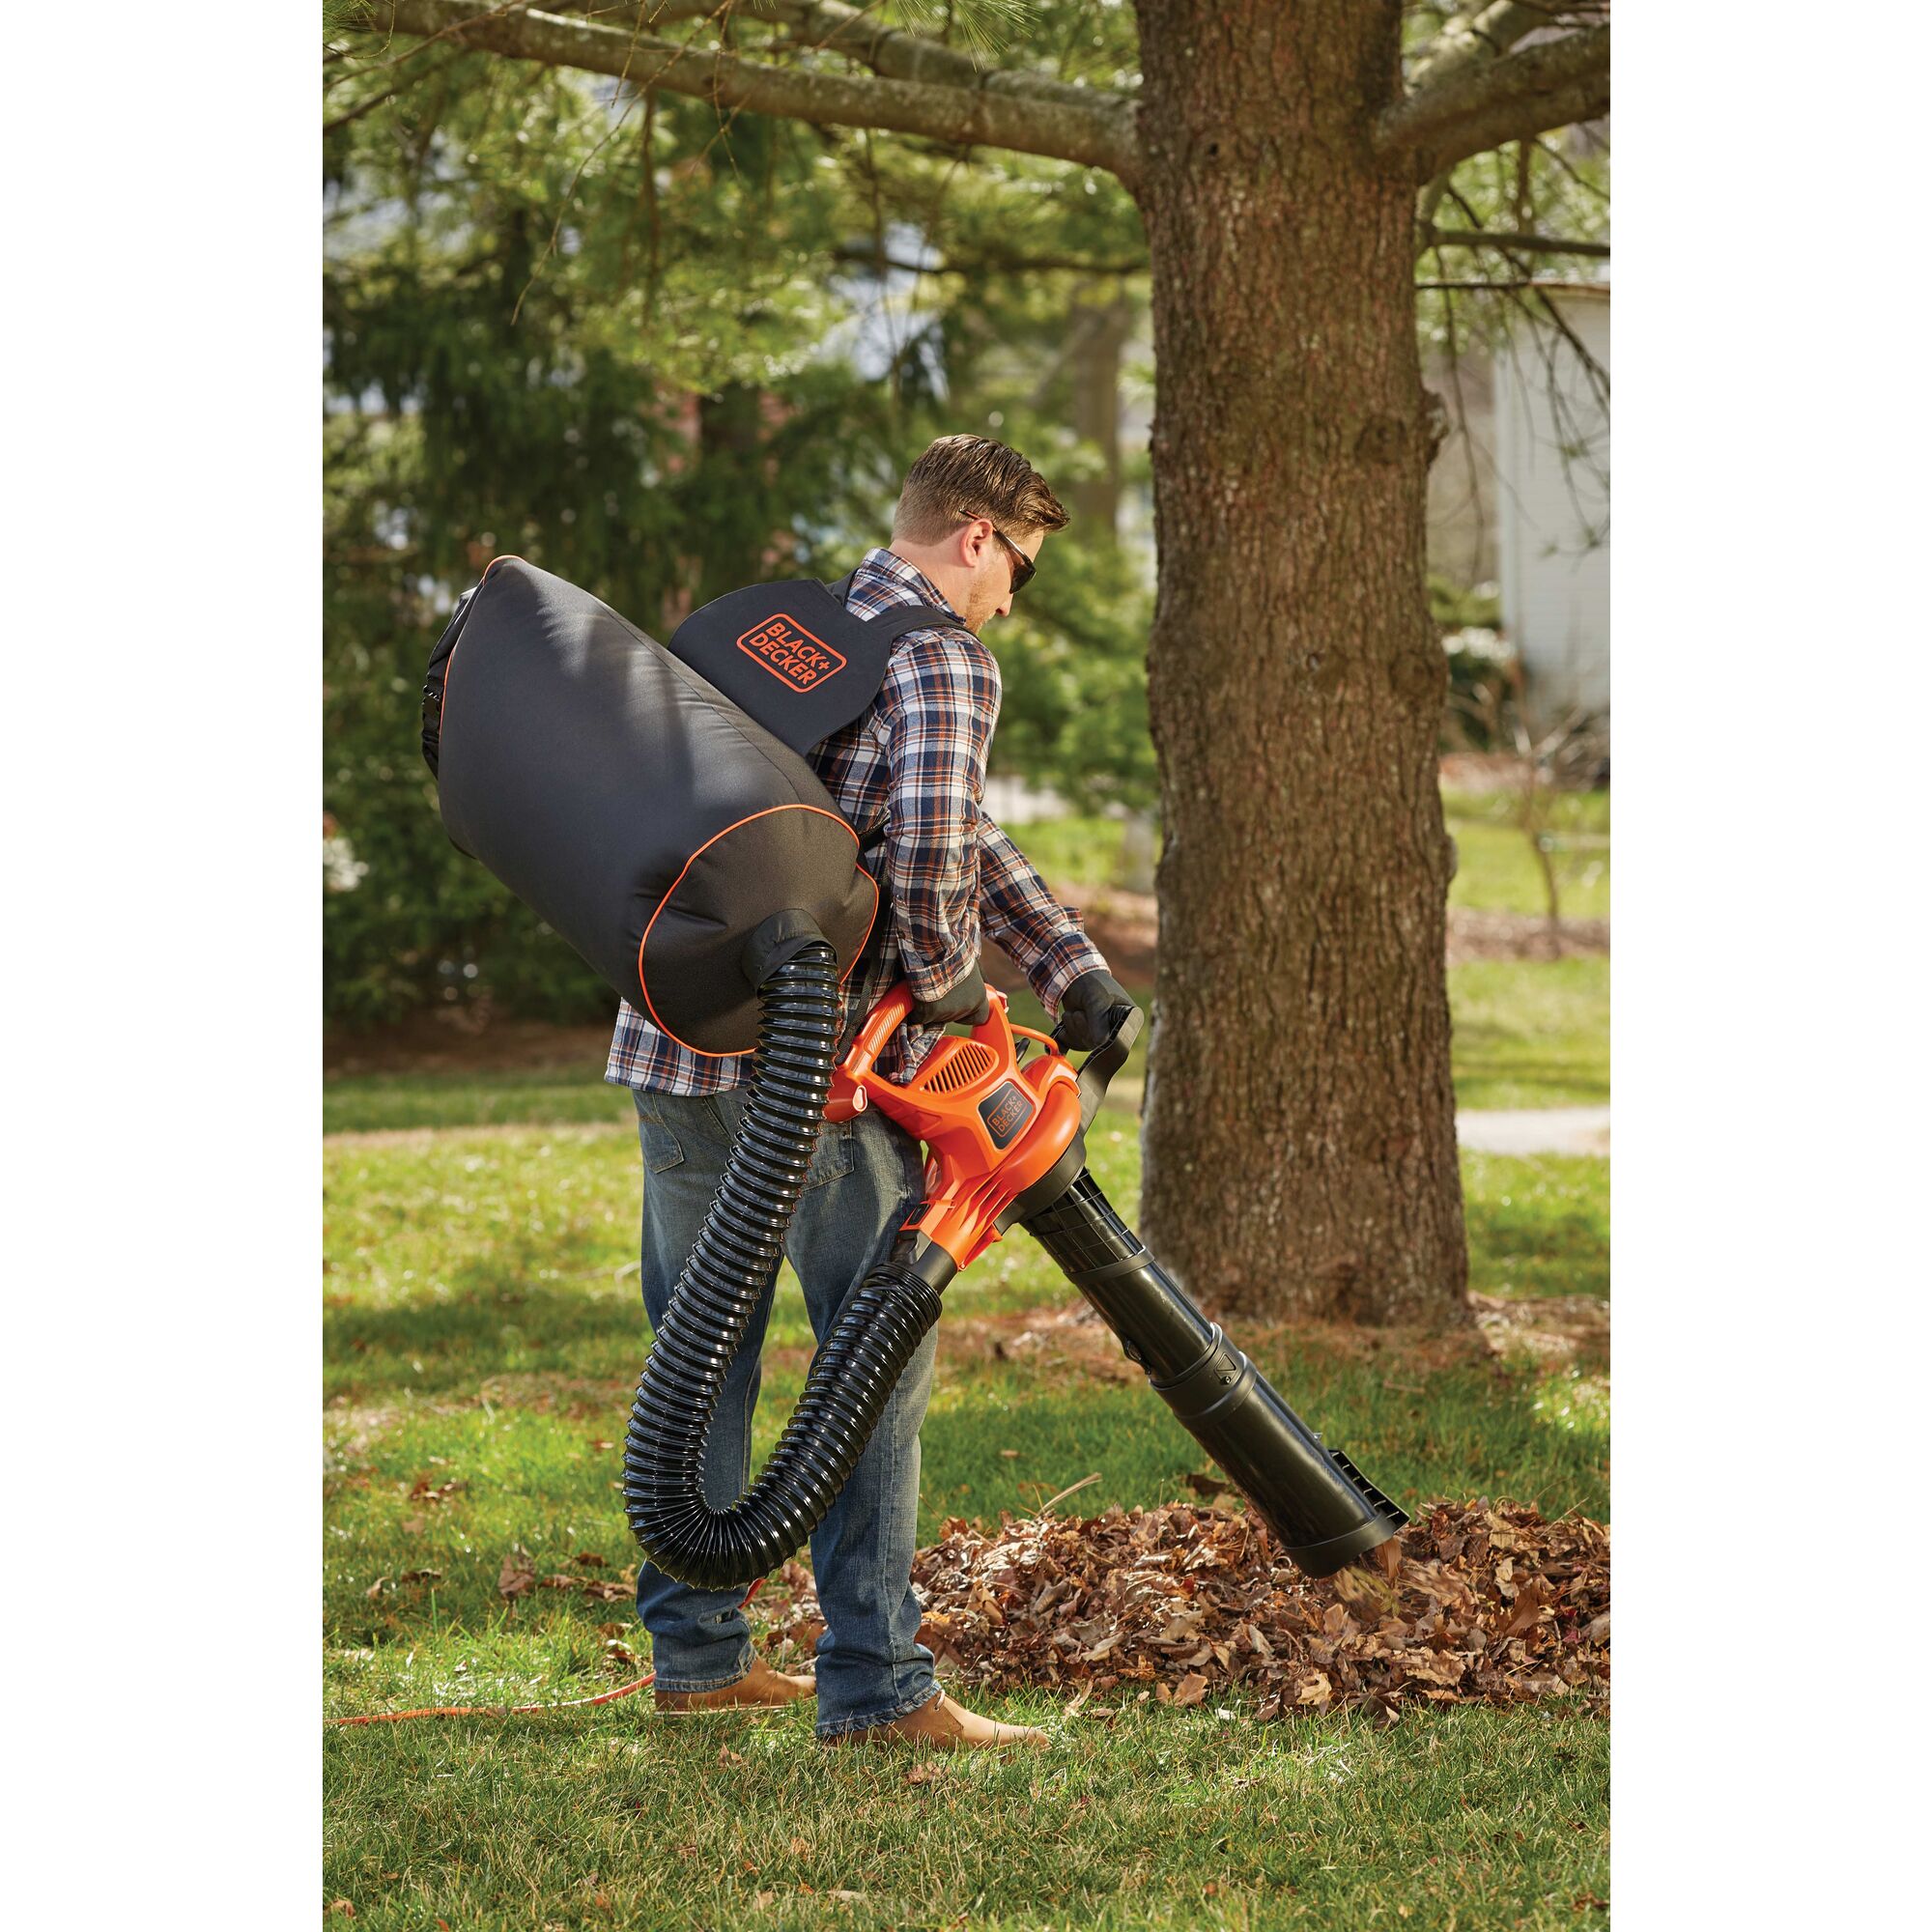 3 in 1 VACPACK 12 Ampere Leaf Blower Vacuum and Mulcher being used by person to clear leaves from ground outdoors.